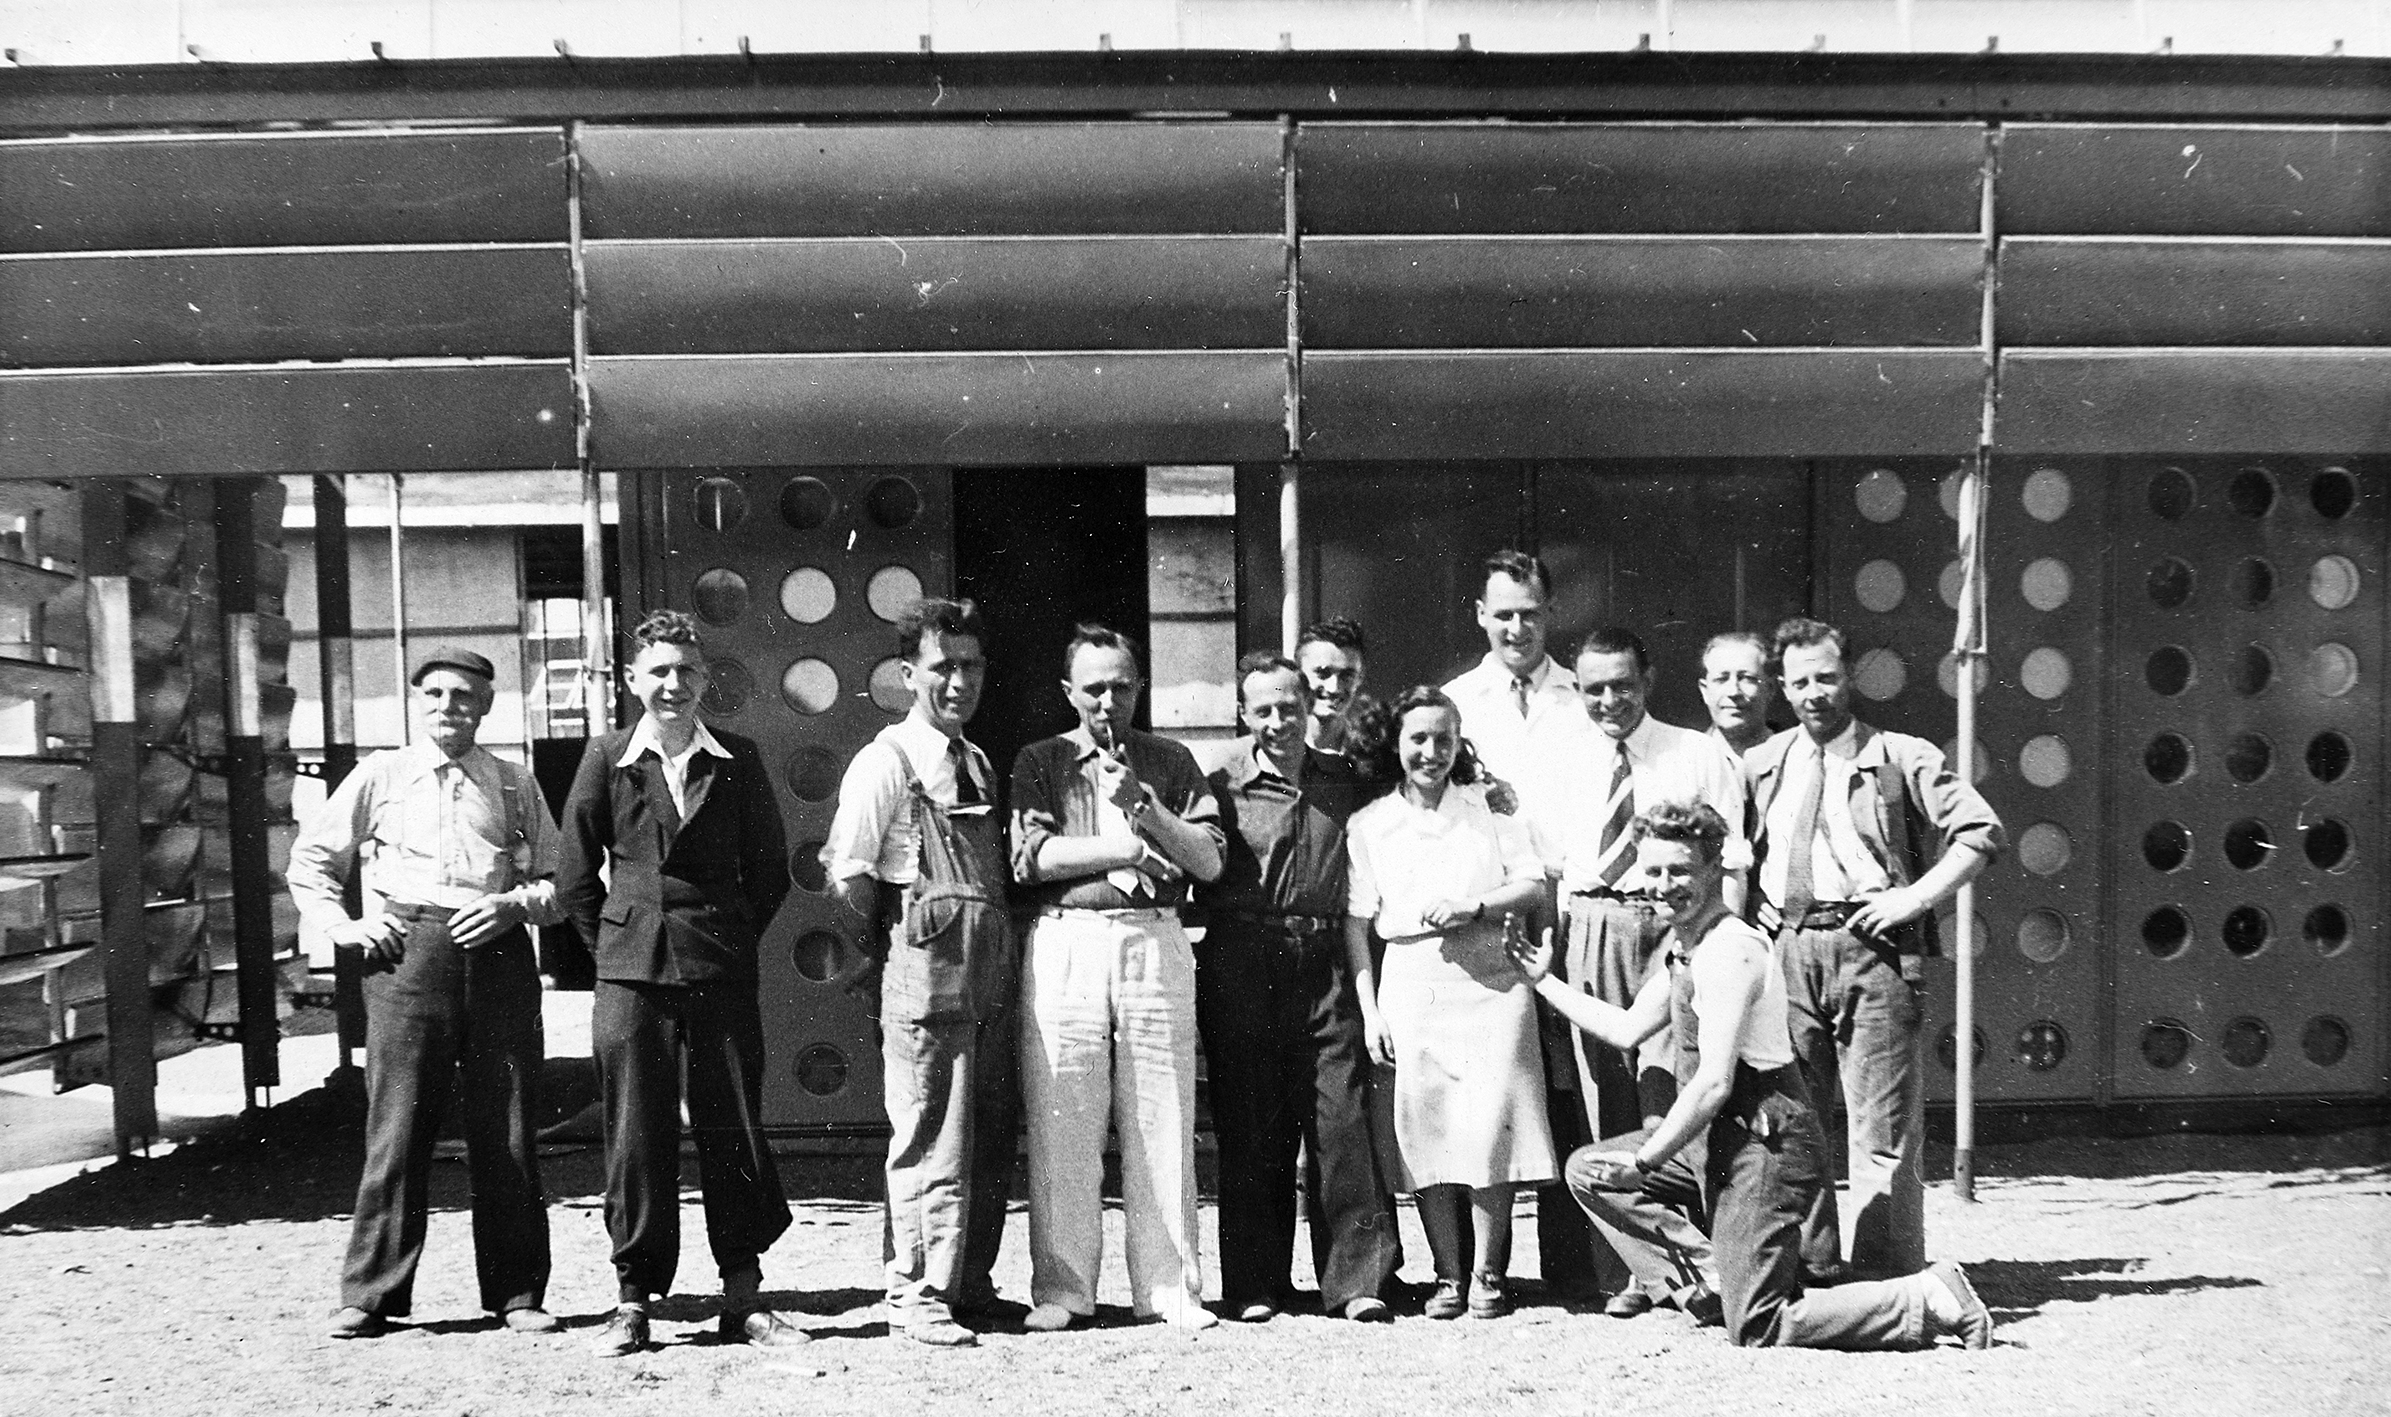 Workers at the Ateliers Jean Prouvé in Maxéville, in front of the prototype of the Tropique house for Niamey, 1949 (Henri Prouvé, arch.).